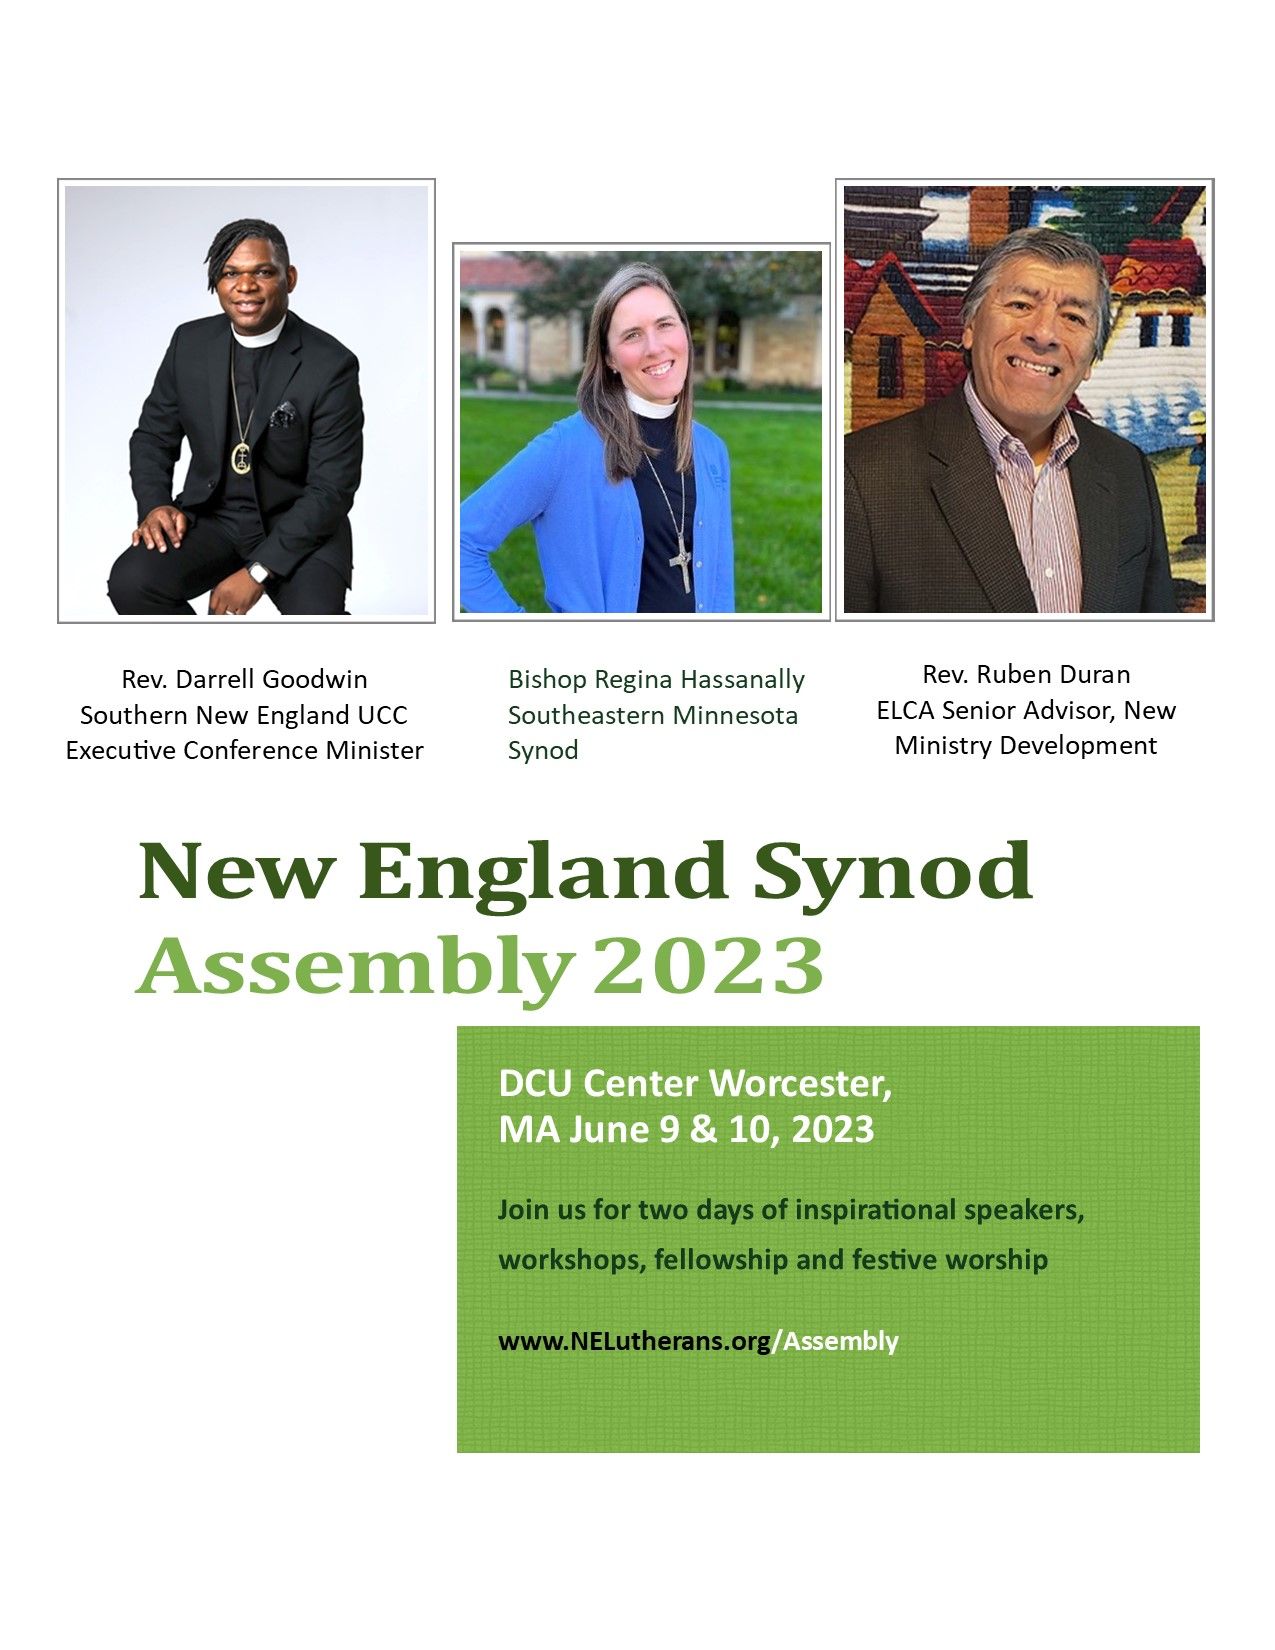 Synod Assembly 2023 - Early Bird Registration Deadline March 31